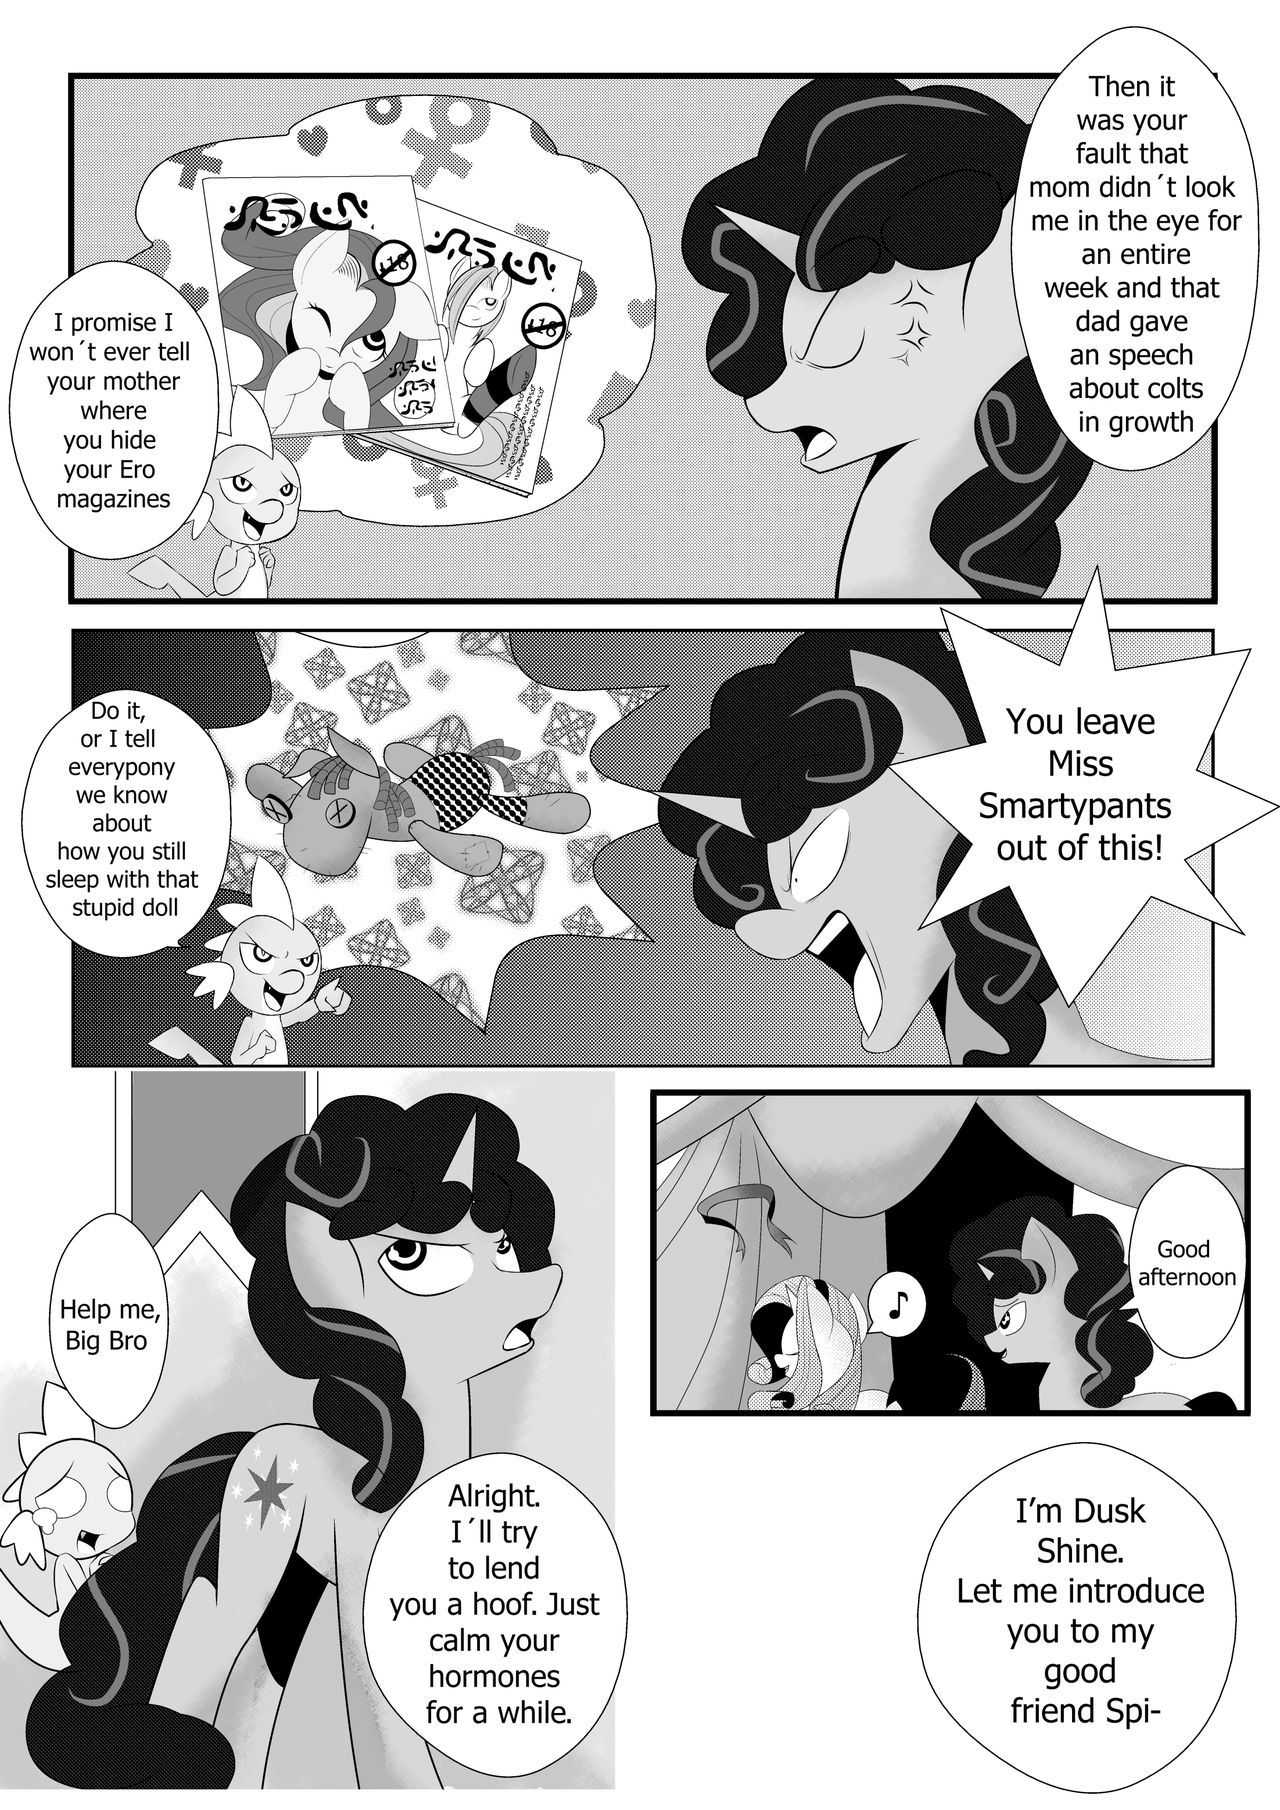 The Unexpected Love Life of Dusk Shine - Hi-Res [ENG] (in progress) 36